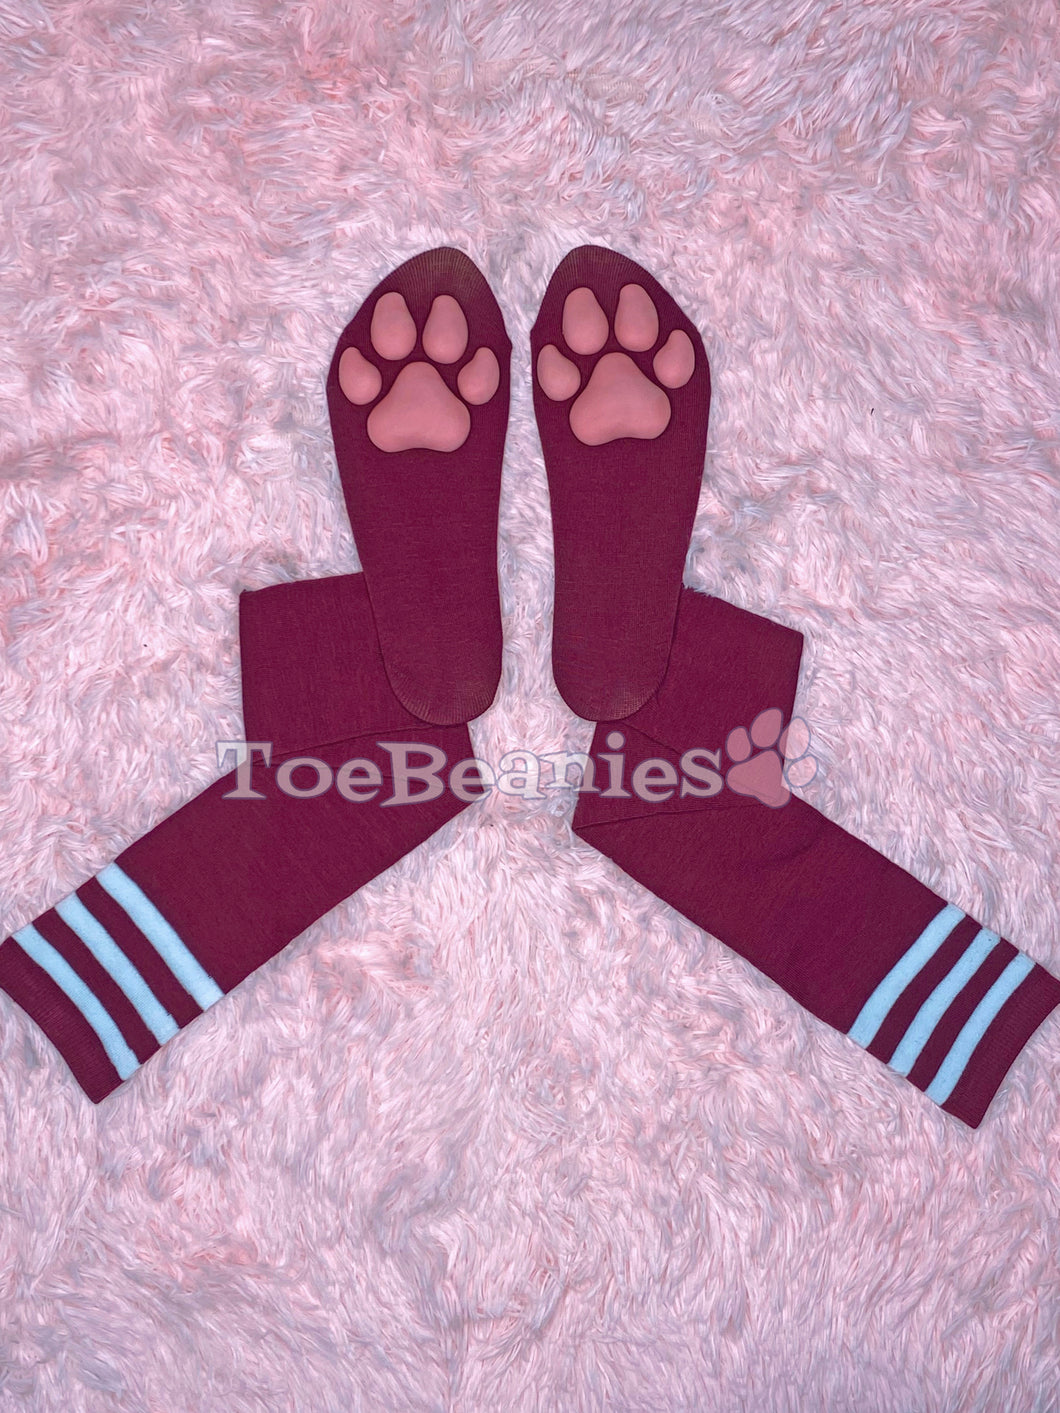 Maroon w/ White Striped Socks with Pink ToeBeanies